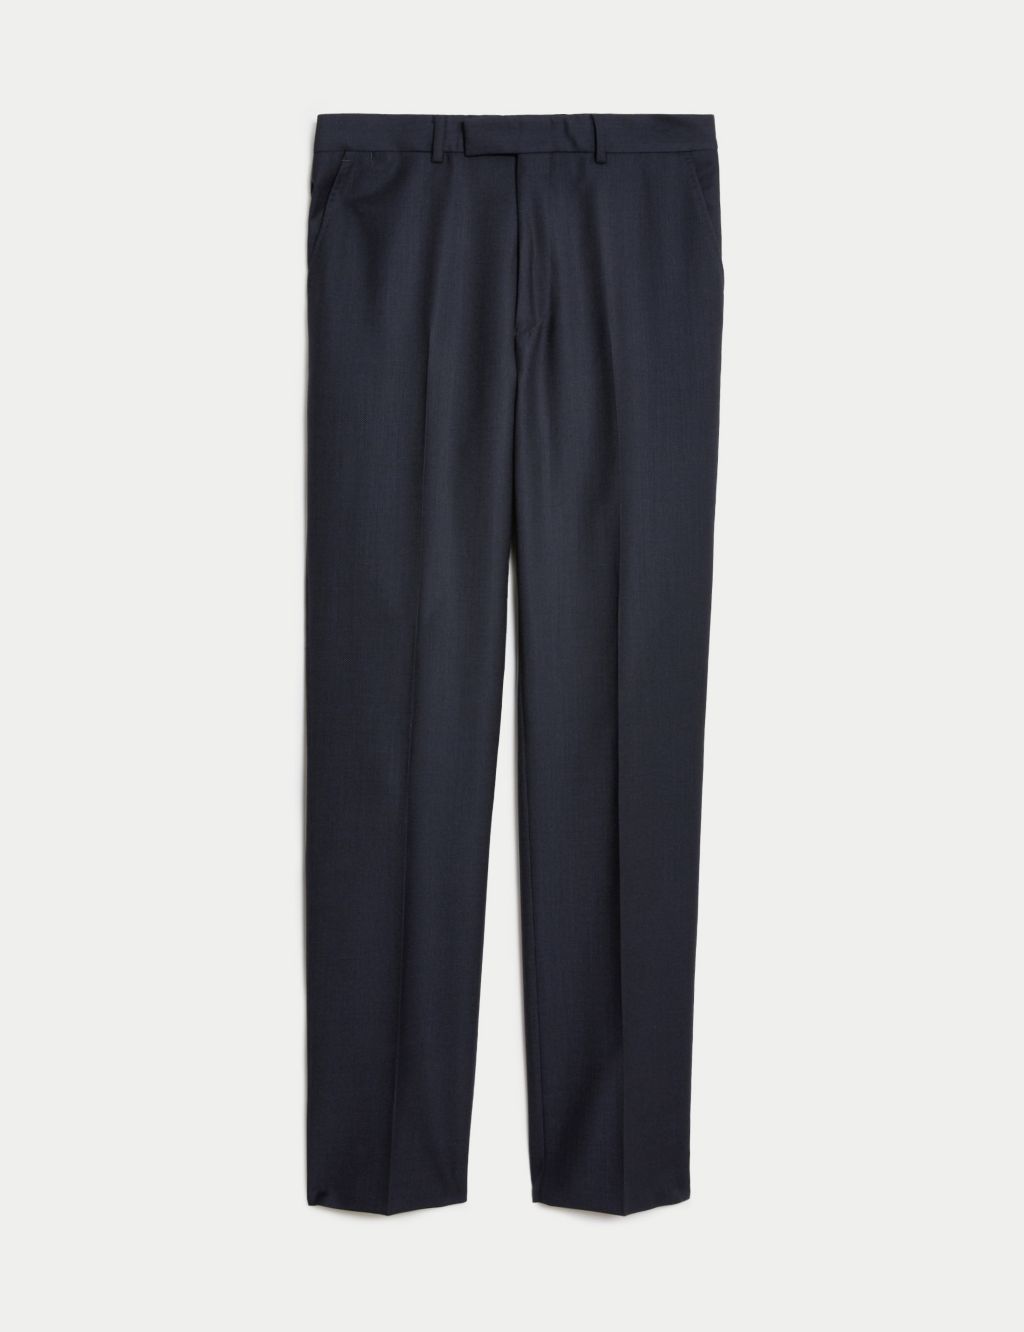 Tailored Fit Pure Wool Birdseye Trousers image 1